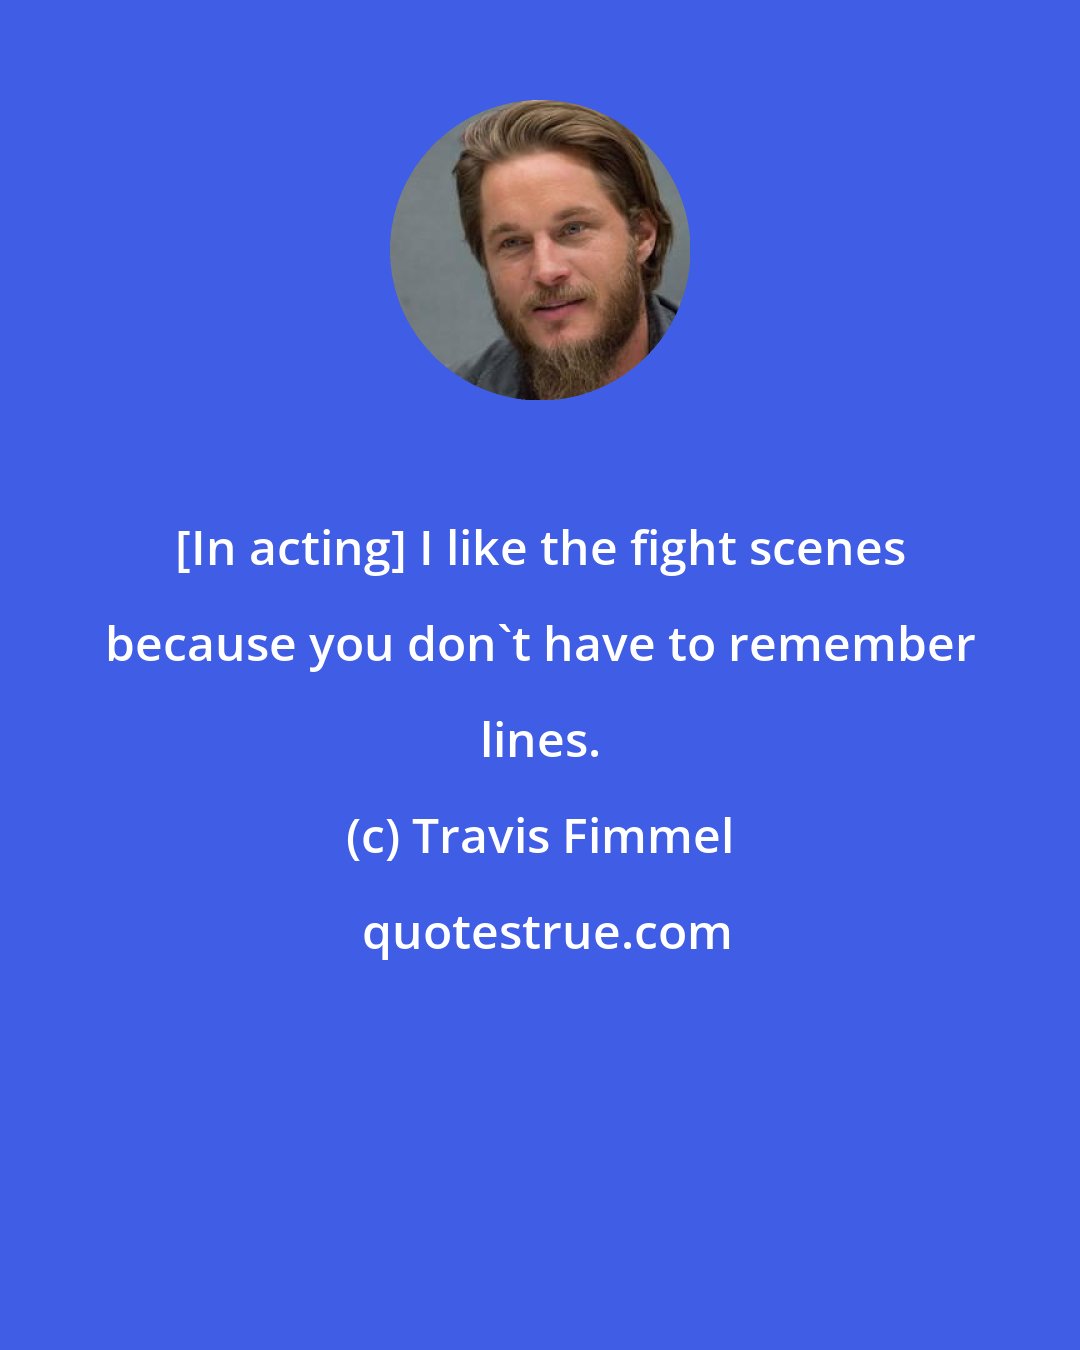 Travis Fimmel: [In acting] I like the fight scenes because you don't have to remember lines.